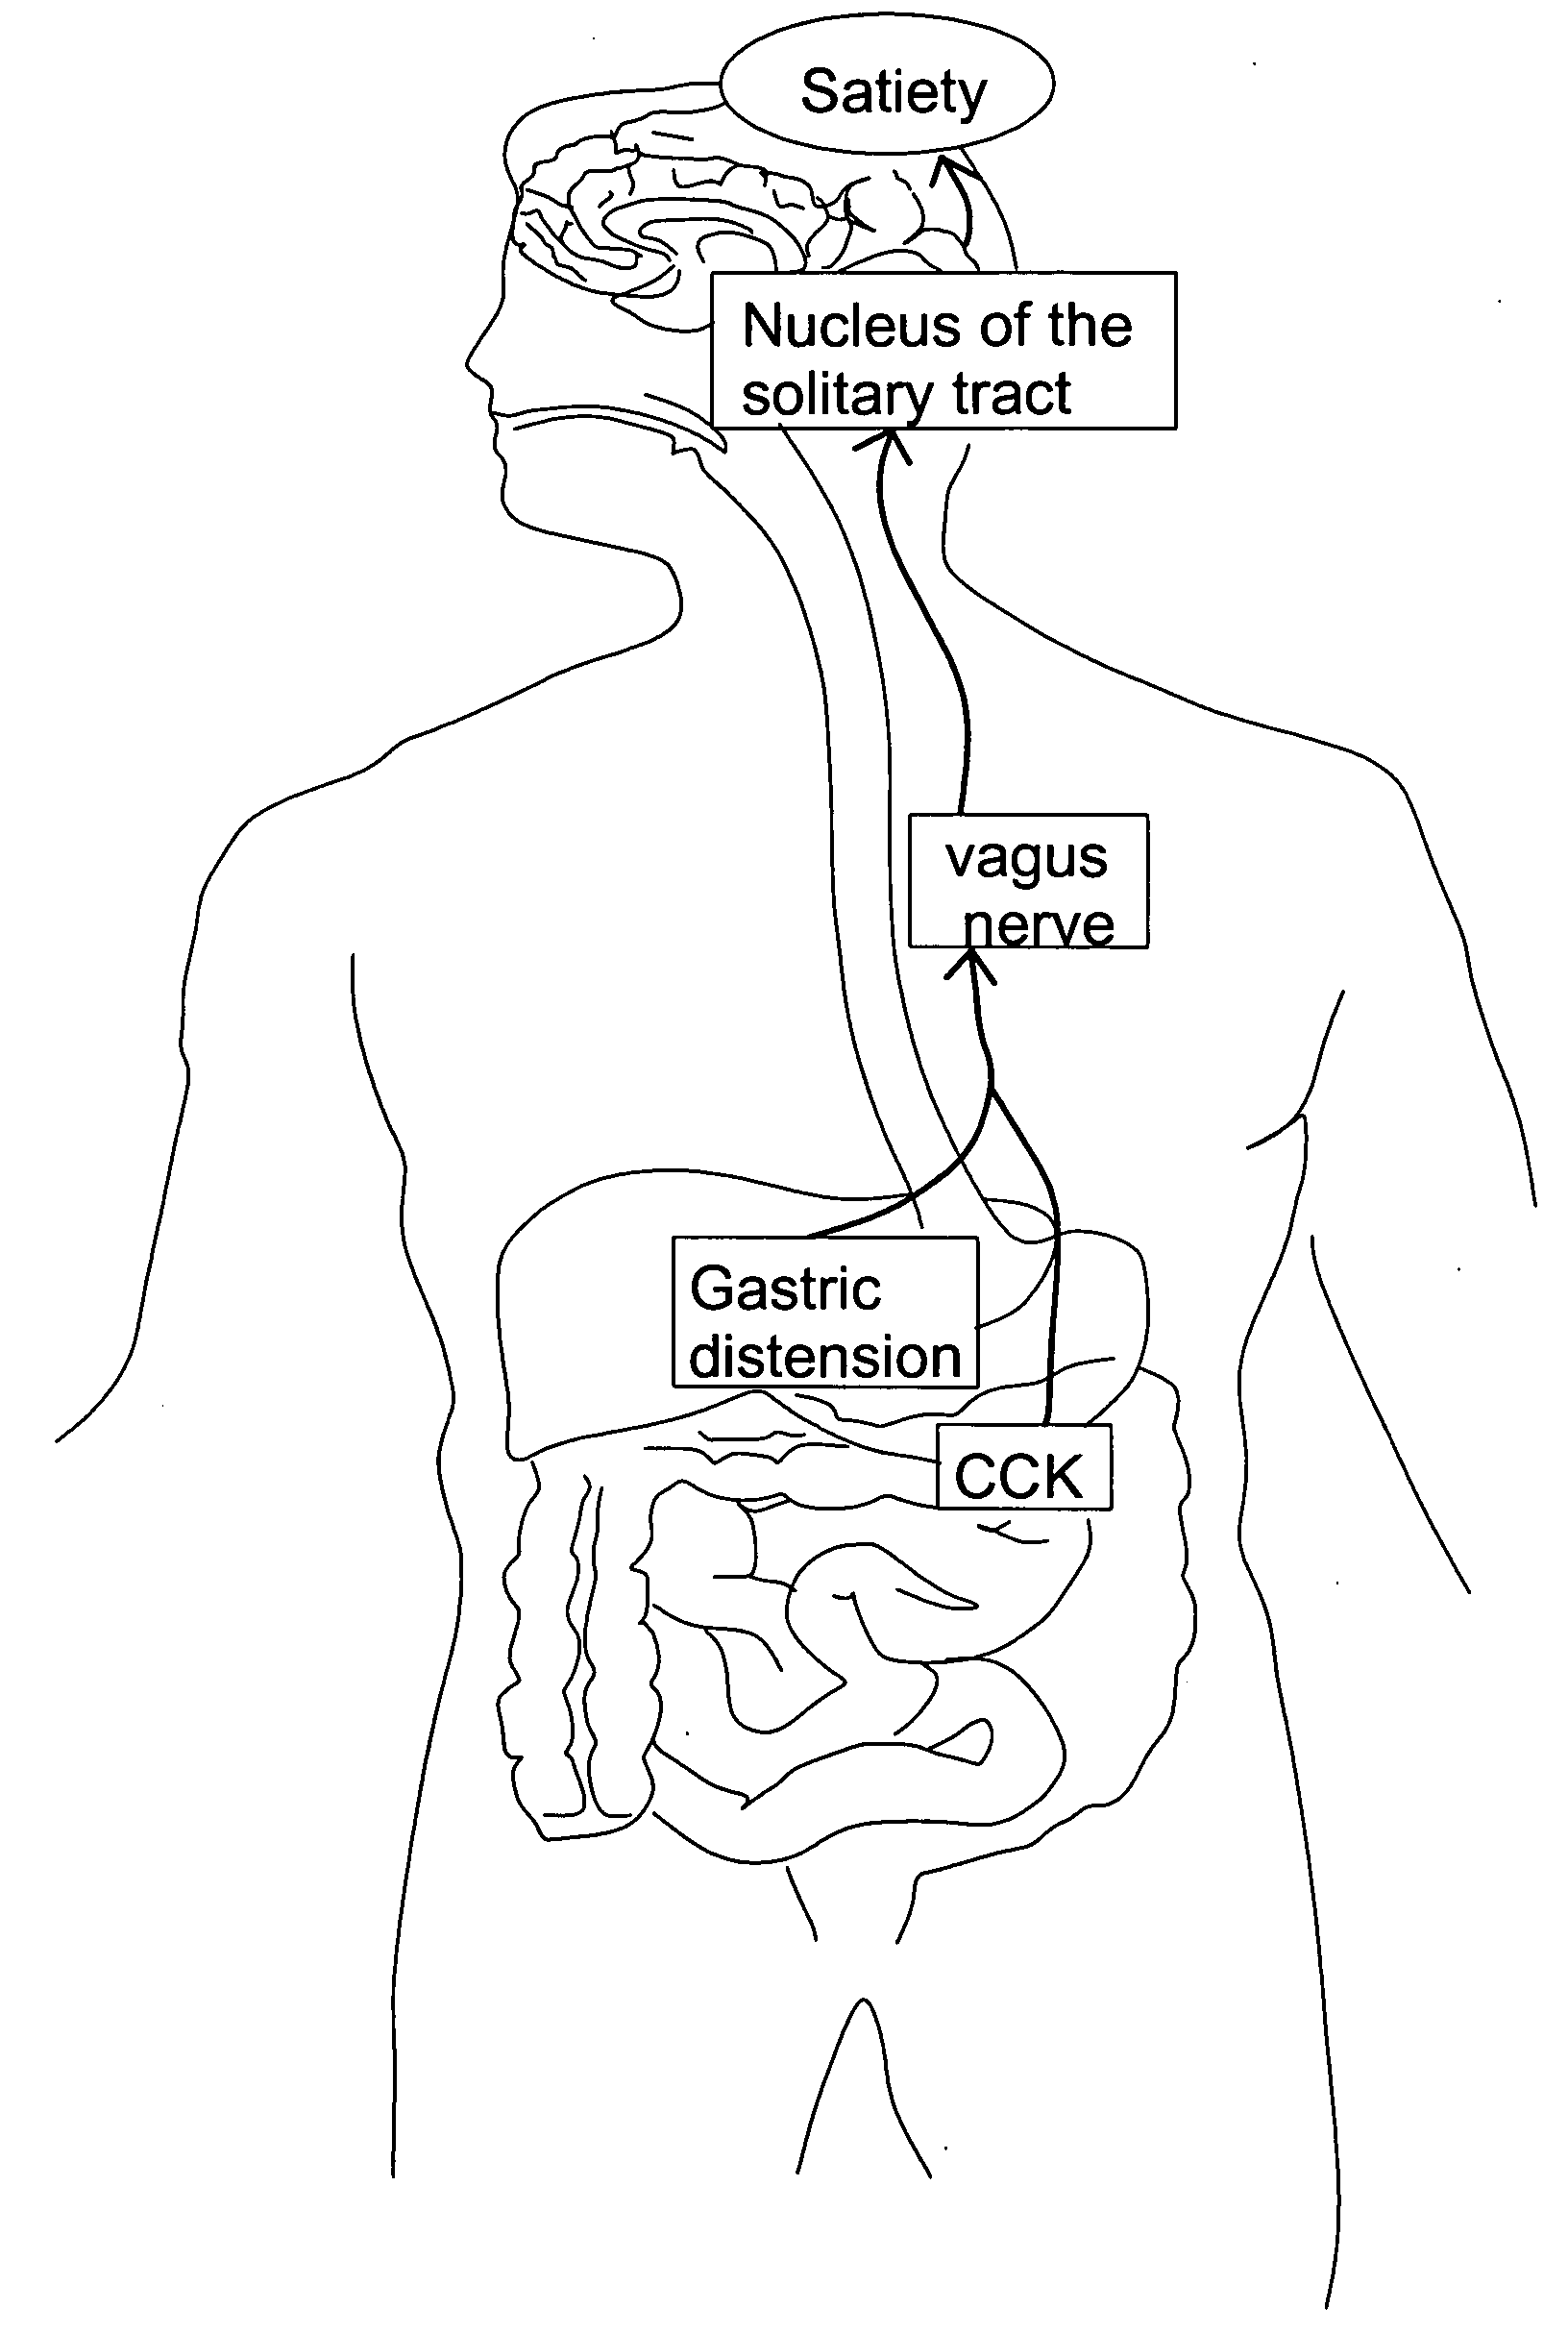 Method and system for vagal blocking and/or vagal stimulation to provide therapy for obesity and other gastrointestinal disorders